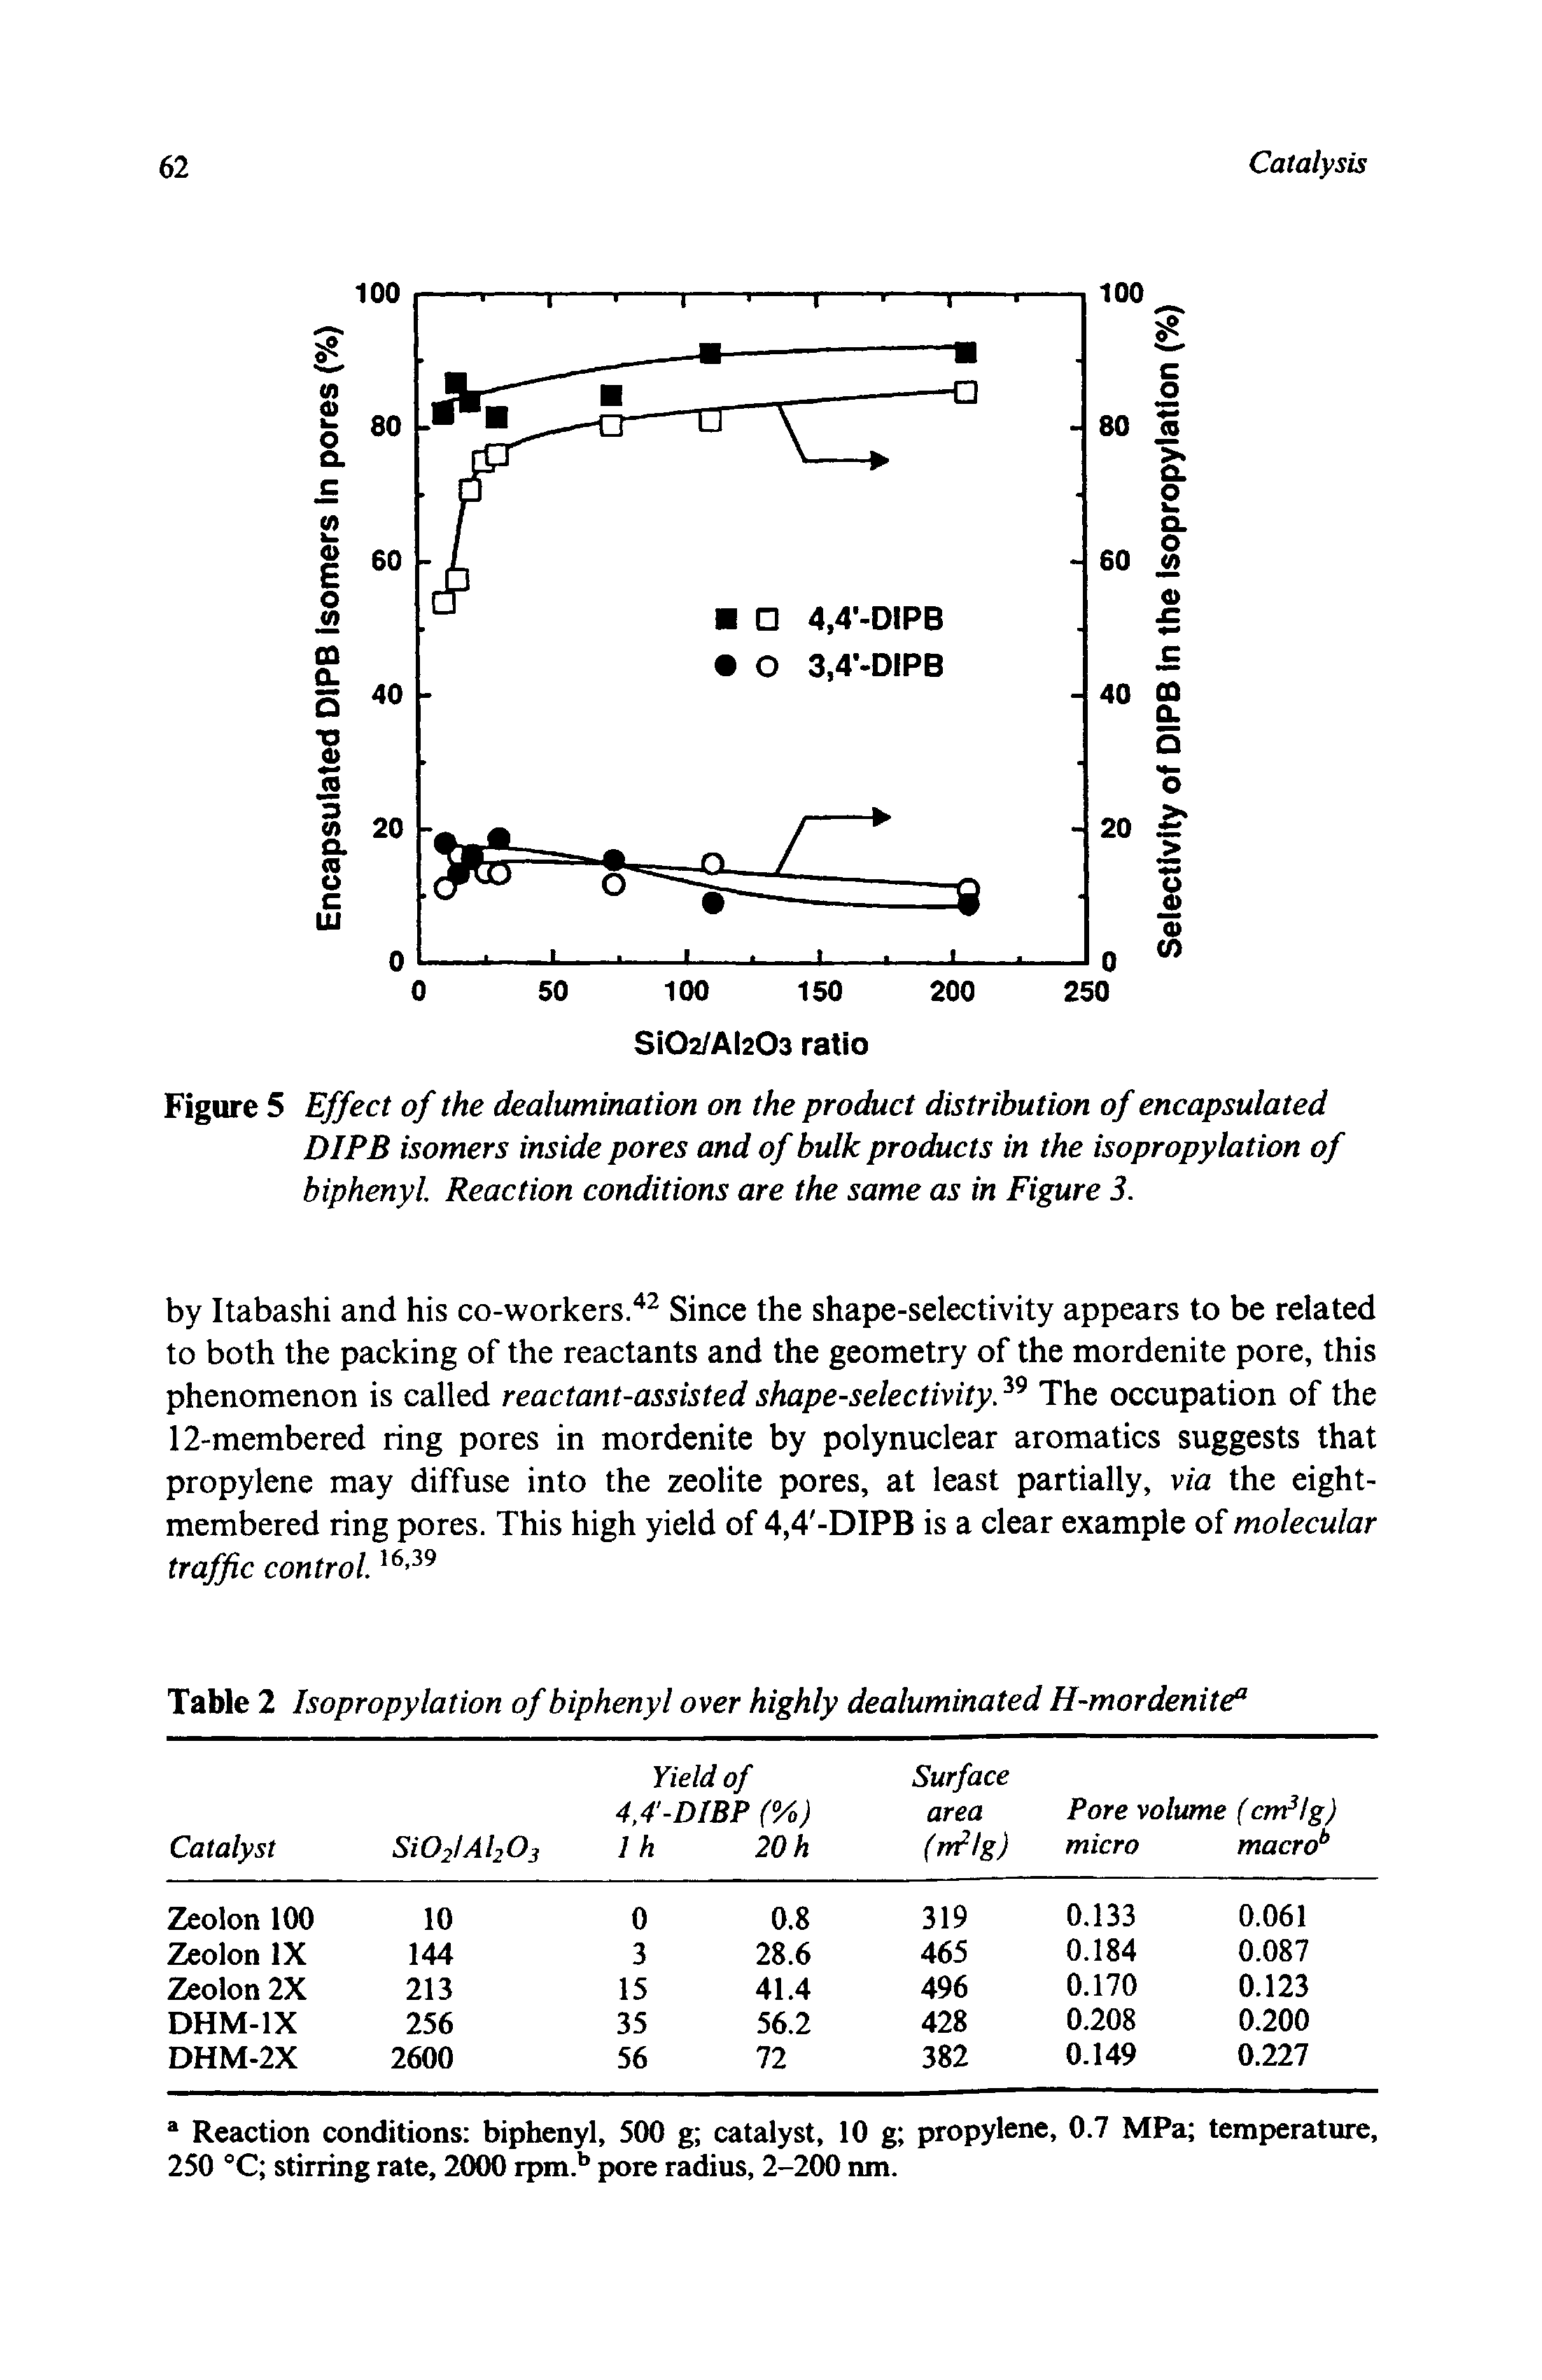 Figure 5 Effect of the dealumination on the product distribution of encapsulated DIP isomers inside pores and of bulk products in the isopropylation of biphenyl. Reaction conditions are the same as in Figure 3.